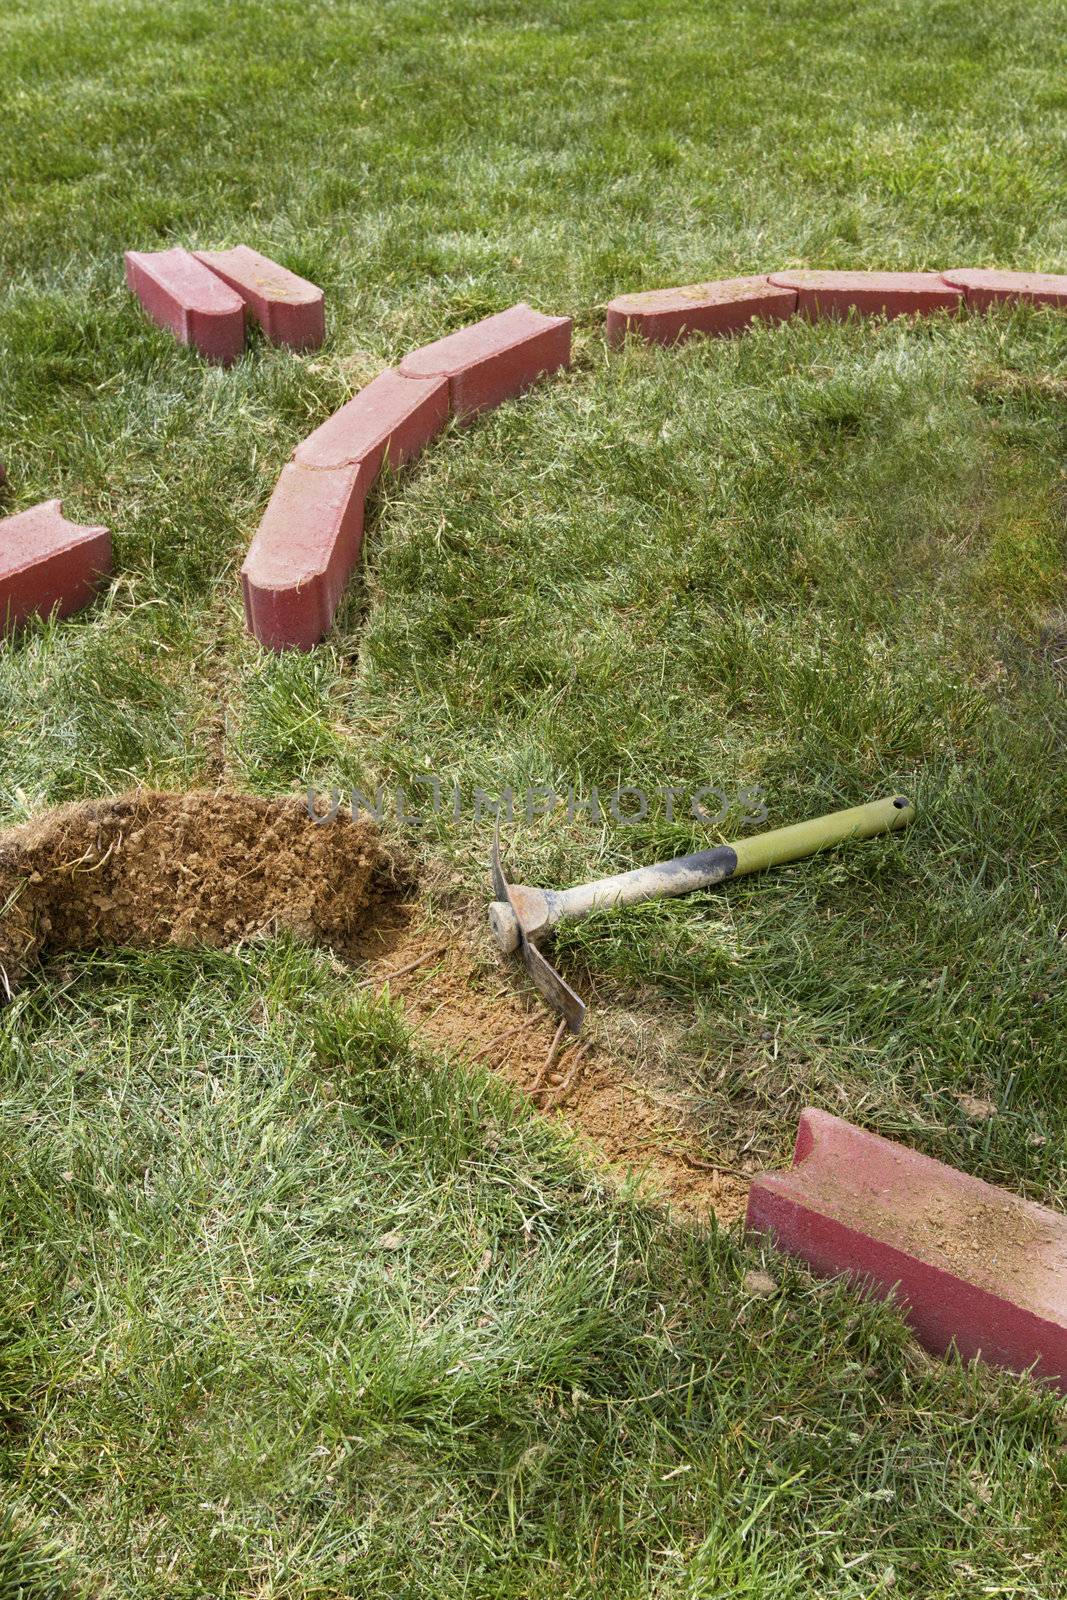 Installing brick edging with one side rounded bricks by removing the grass.